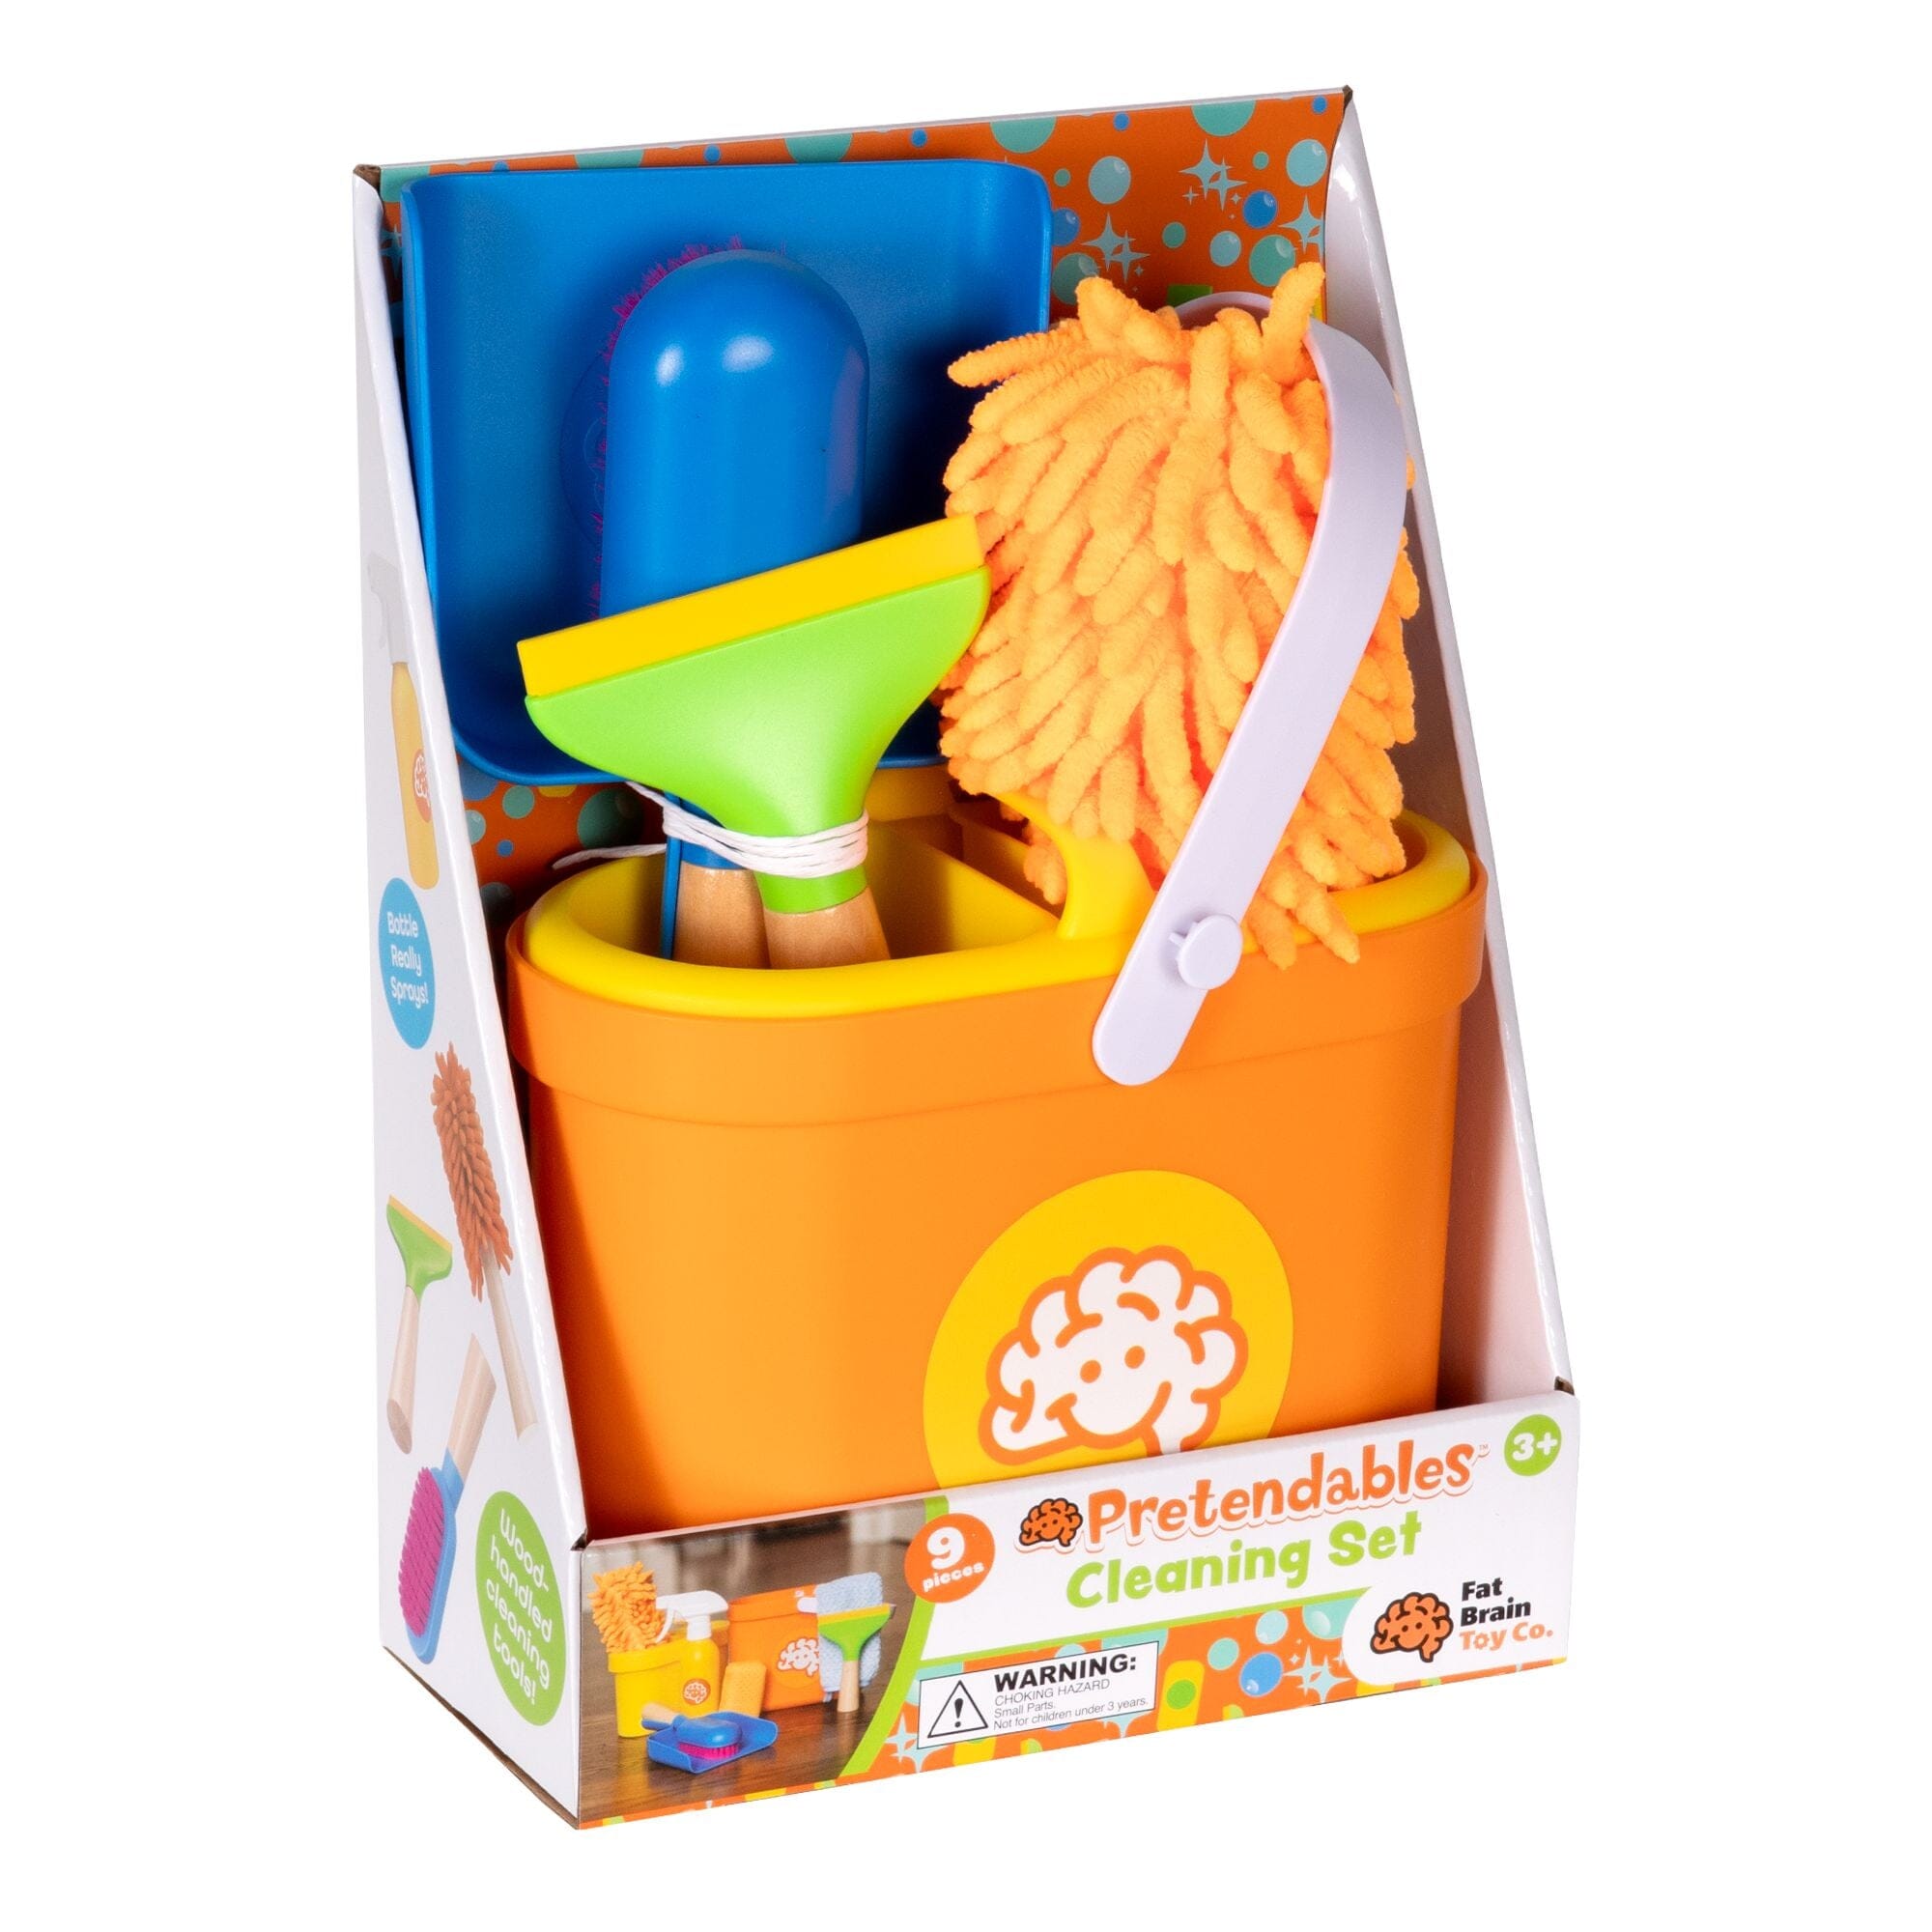 Pretendables Cleaning Set by Fat Brain Toys